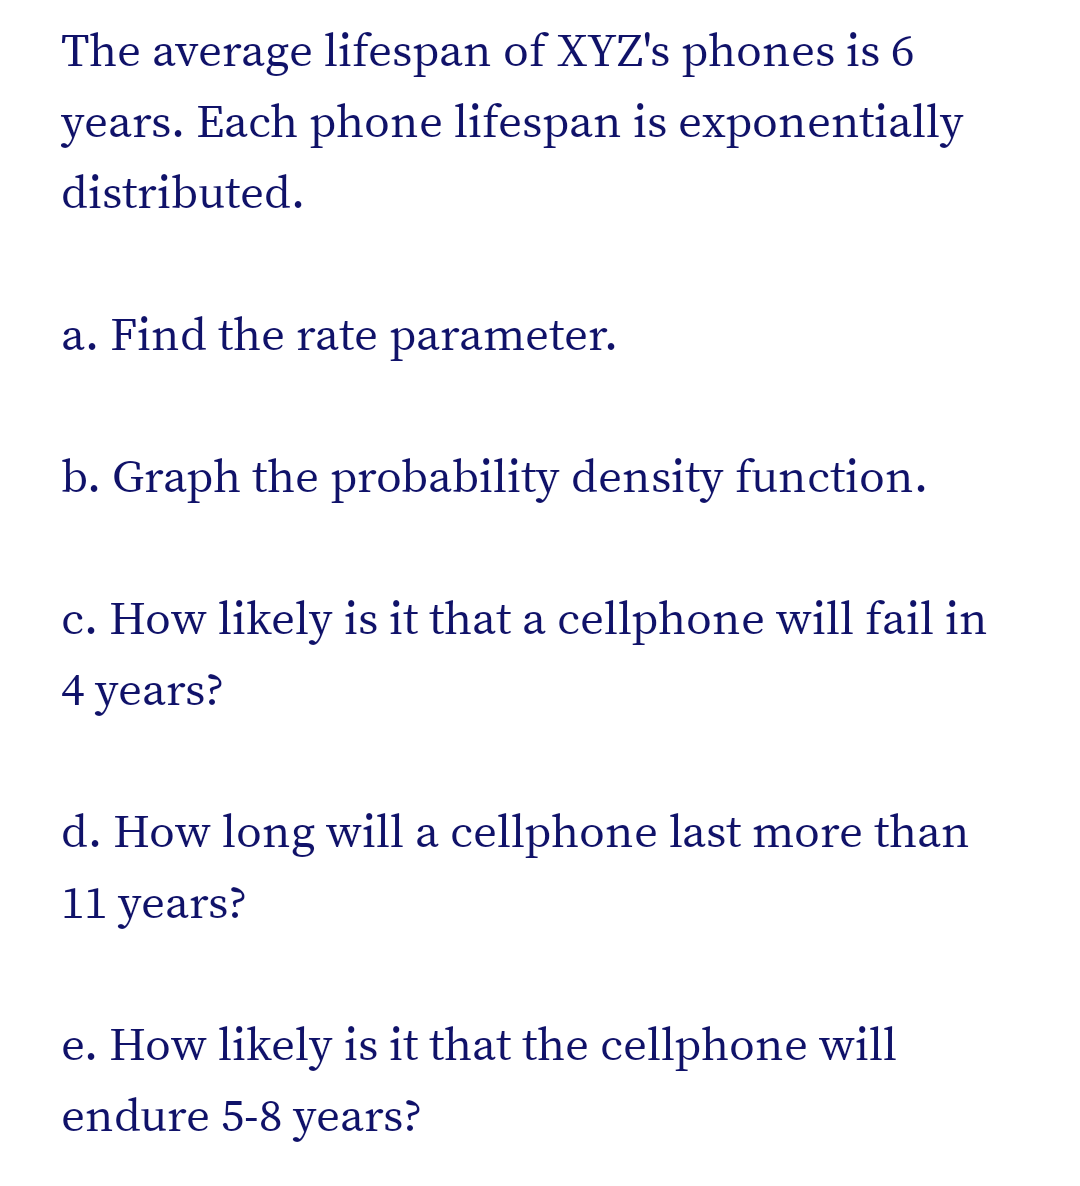 The average lifespan of XYZ's phones is 6
years. Each phone lifespan is exponentially
distributed.
a. Find the rate parameter.
b. Graph the probability density function.
c. How likely is it that a cellphone will fail in
4 years?
d. How long will a cellphone last more than
11 years?
e. How likely is it that the cellphone will
endure 5-8 years?
